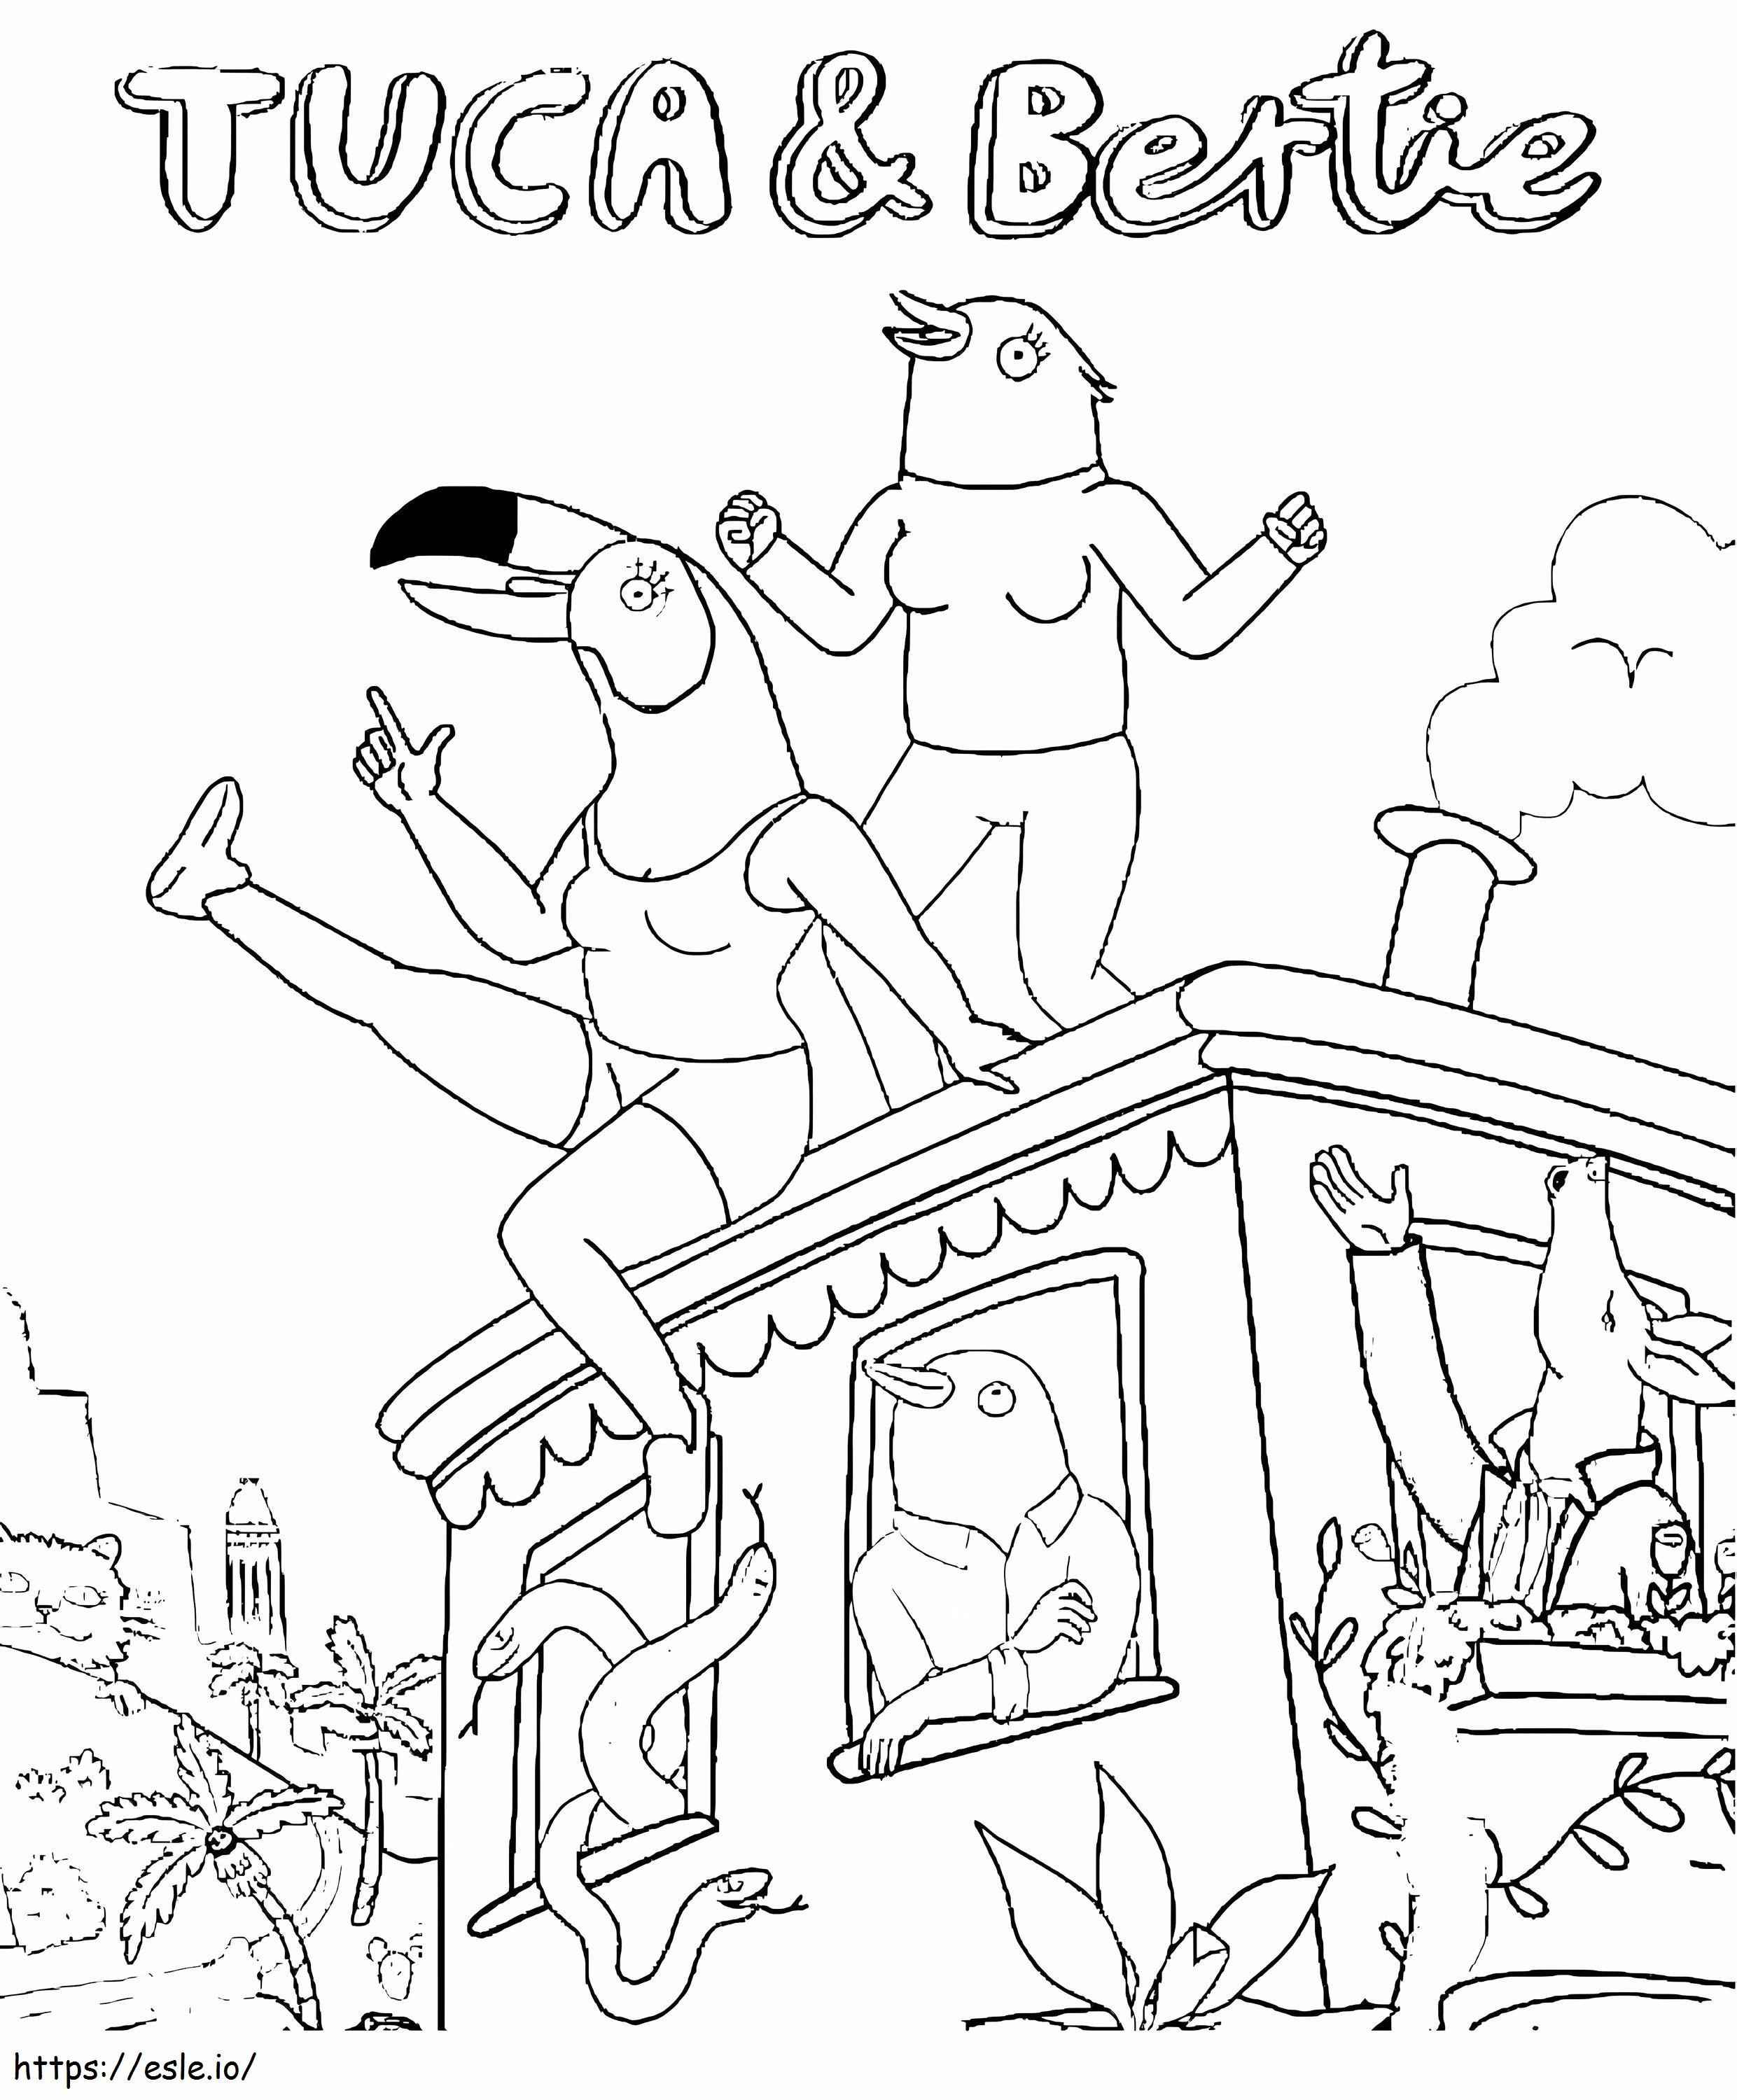 Tuca And Bertie Characters coloring page